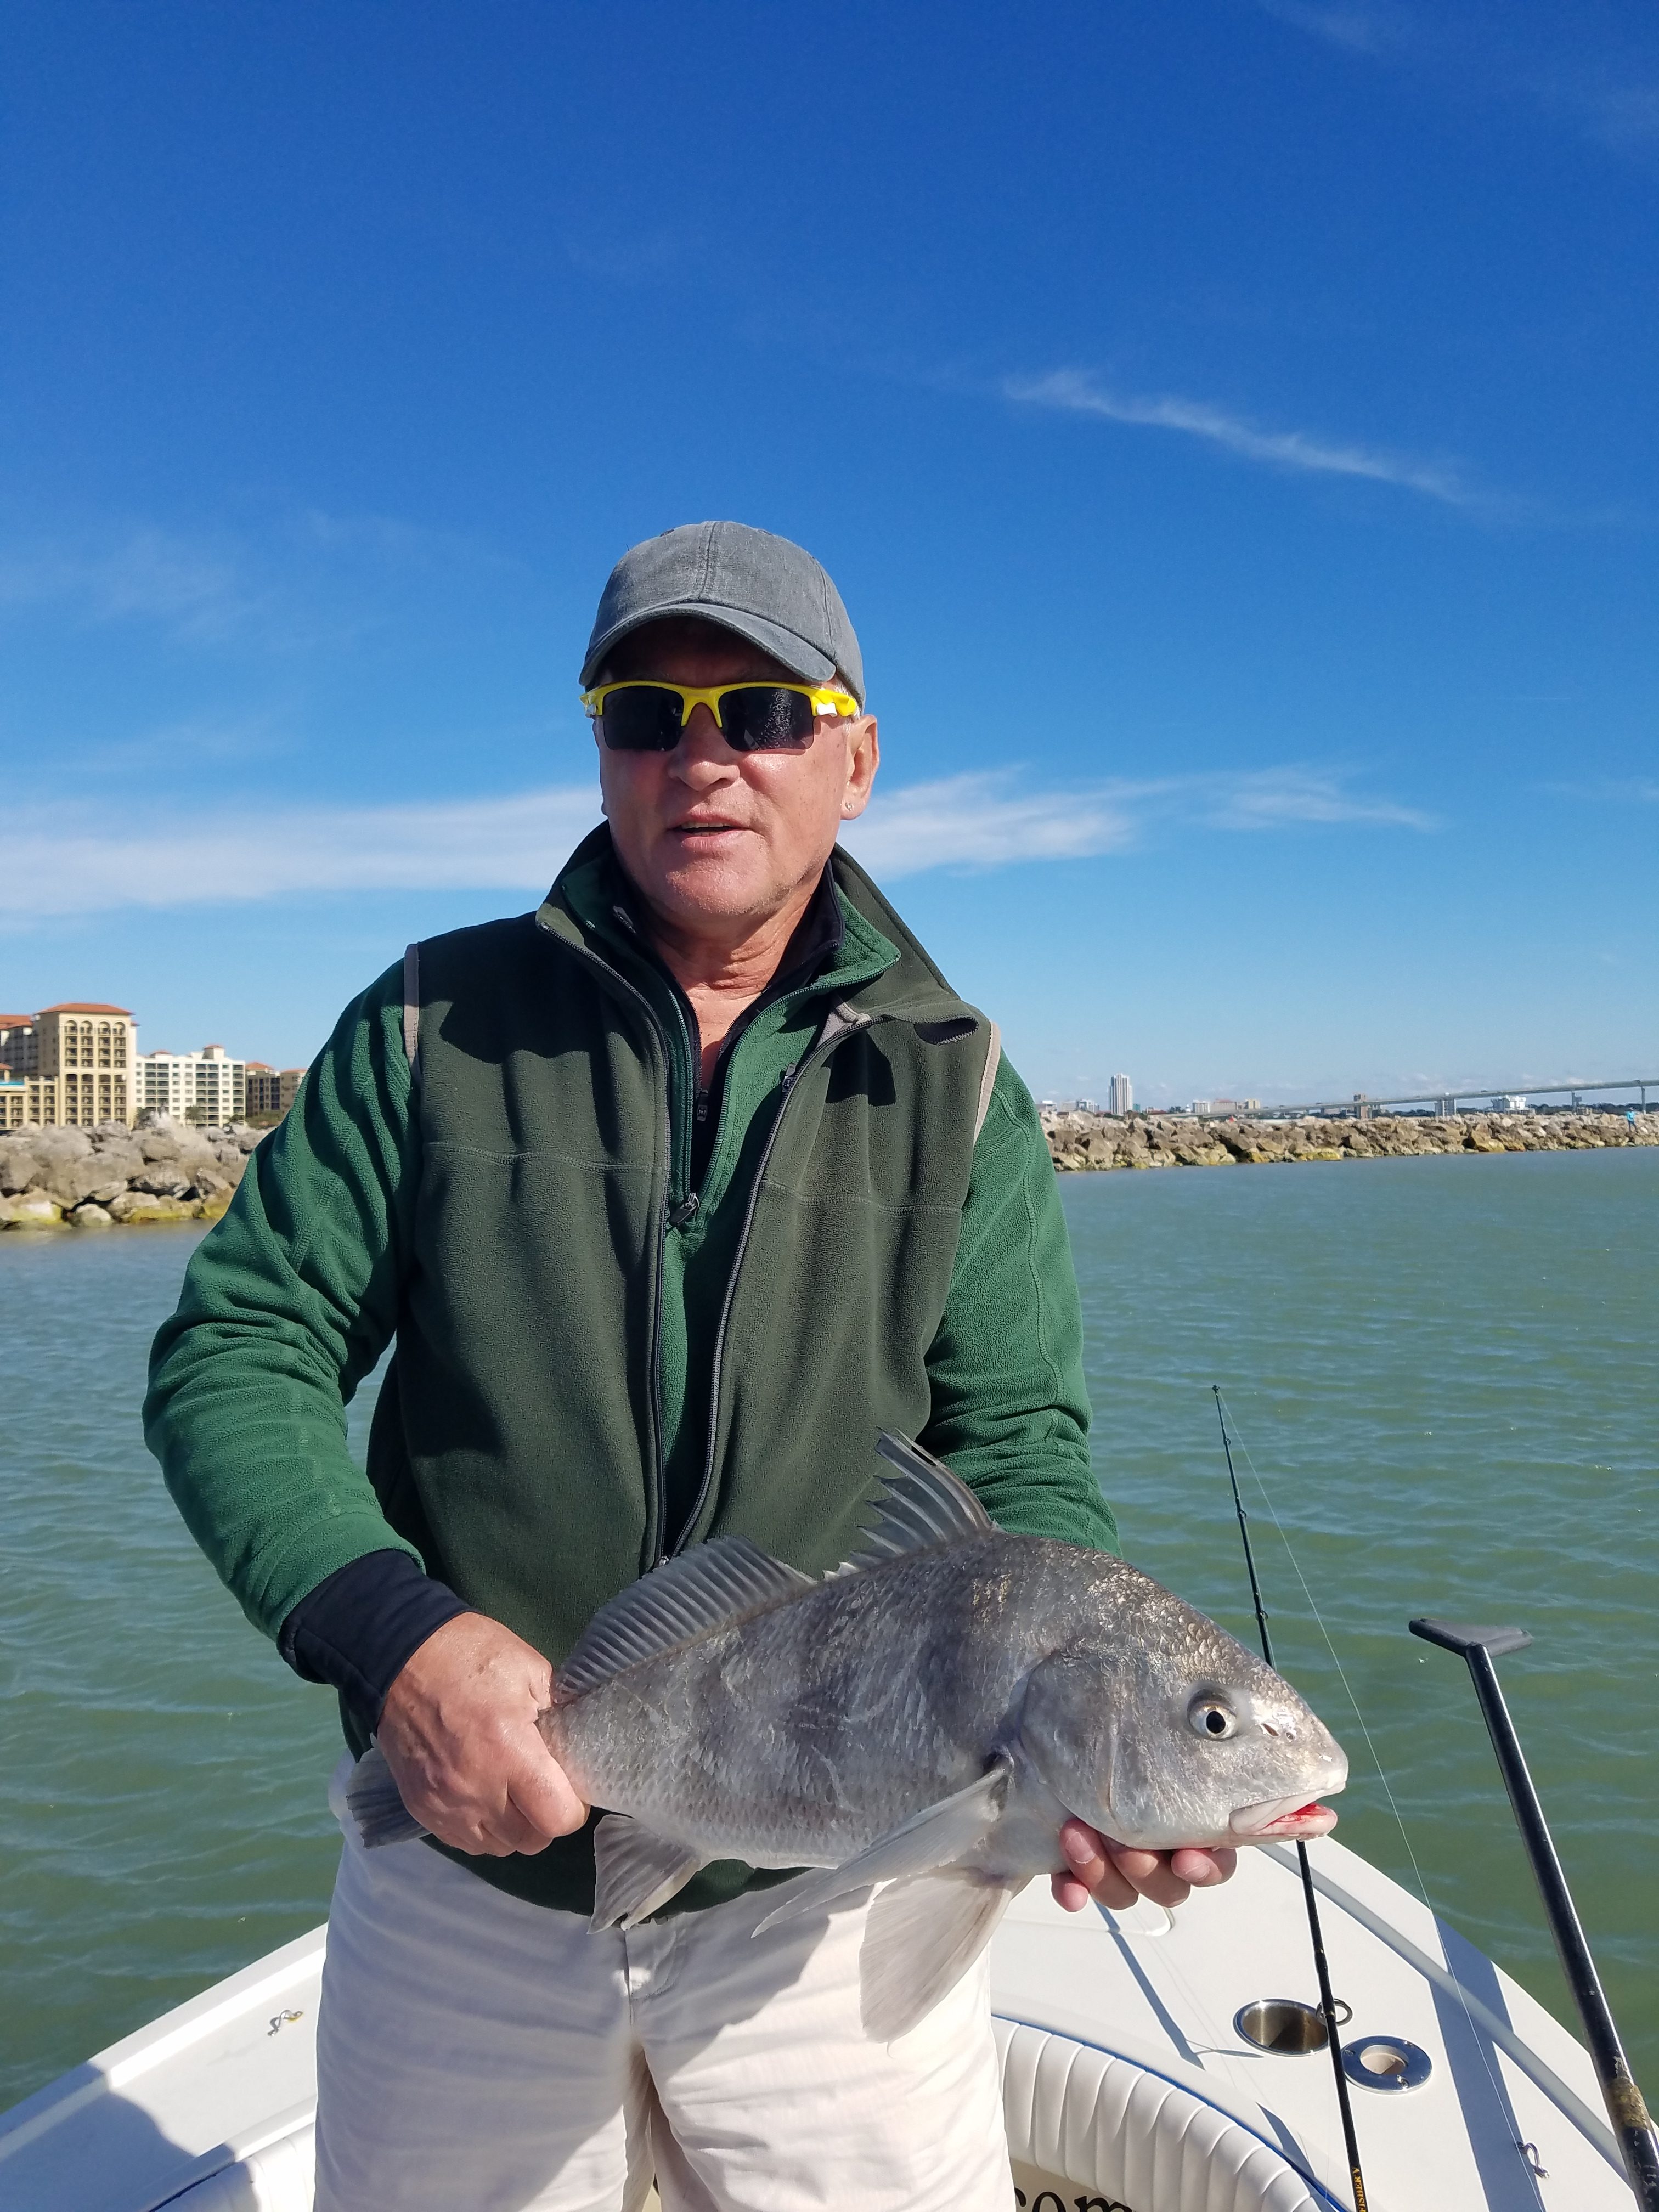 Black Drum Caught while on a fishing guide trip near Clearwater beach, fl